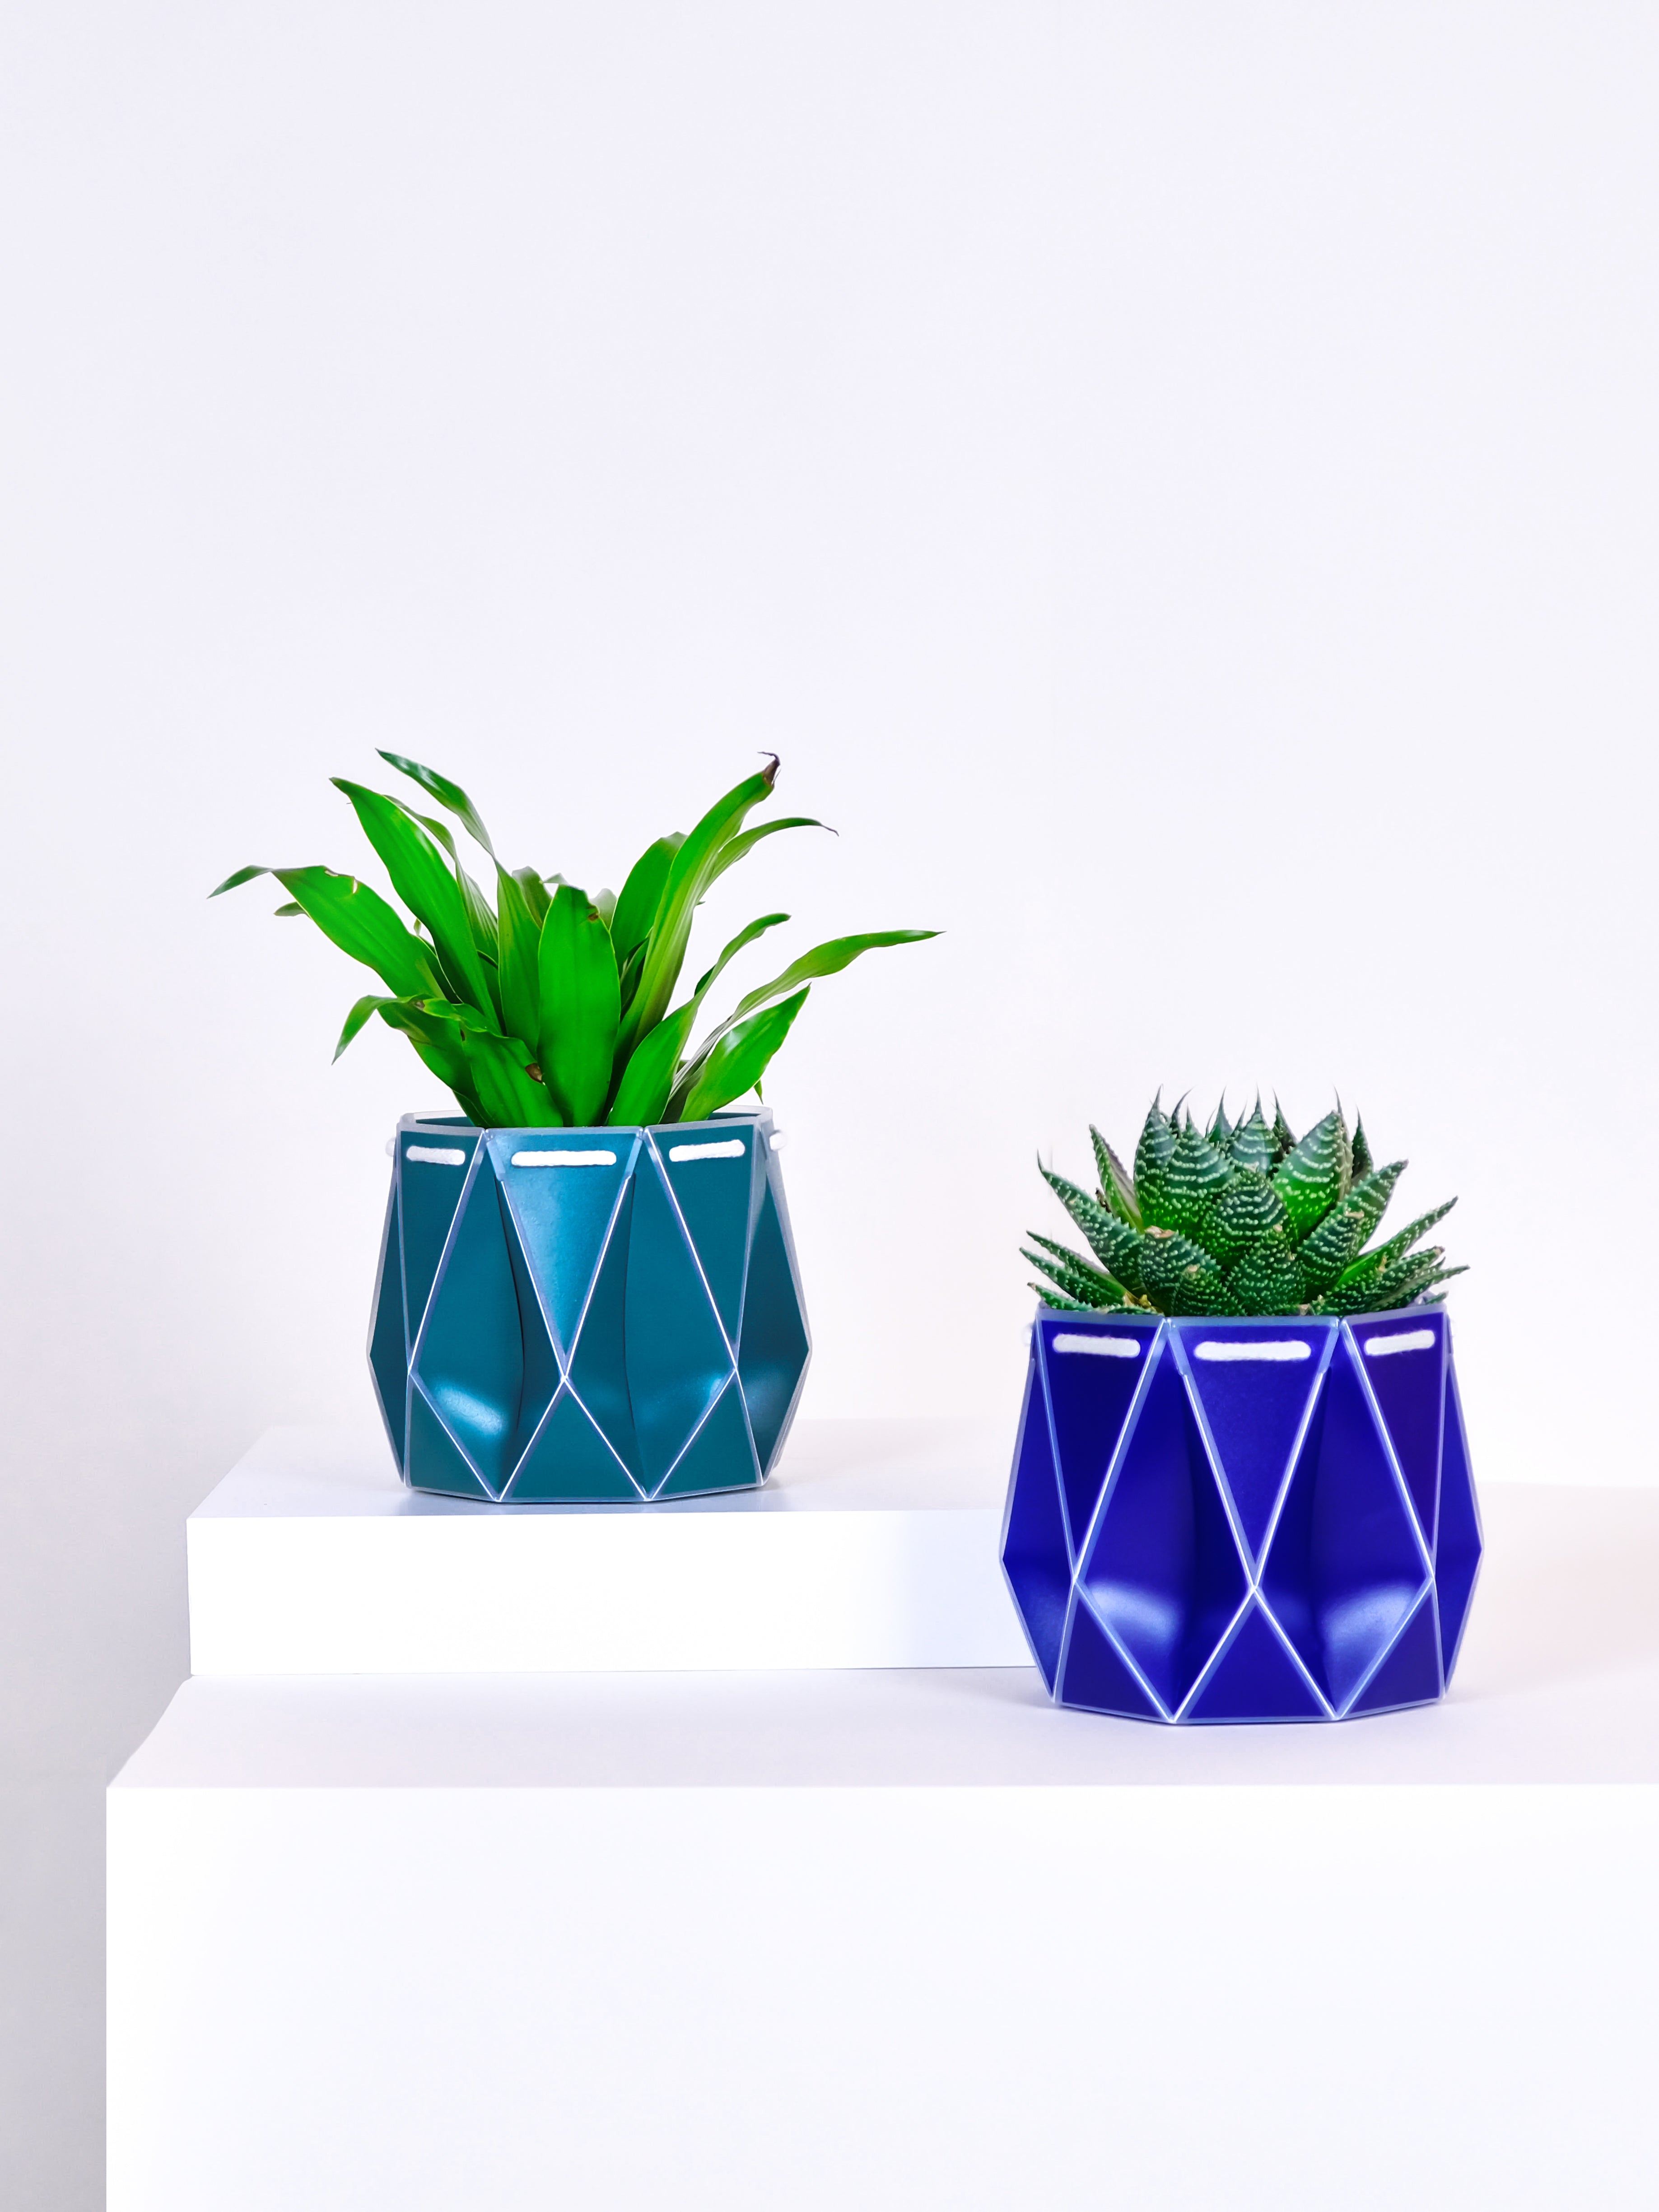 11cm origami self-watering plant pots in green and blue colours. Made from recycled single use plastic.